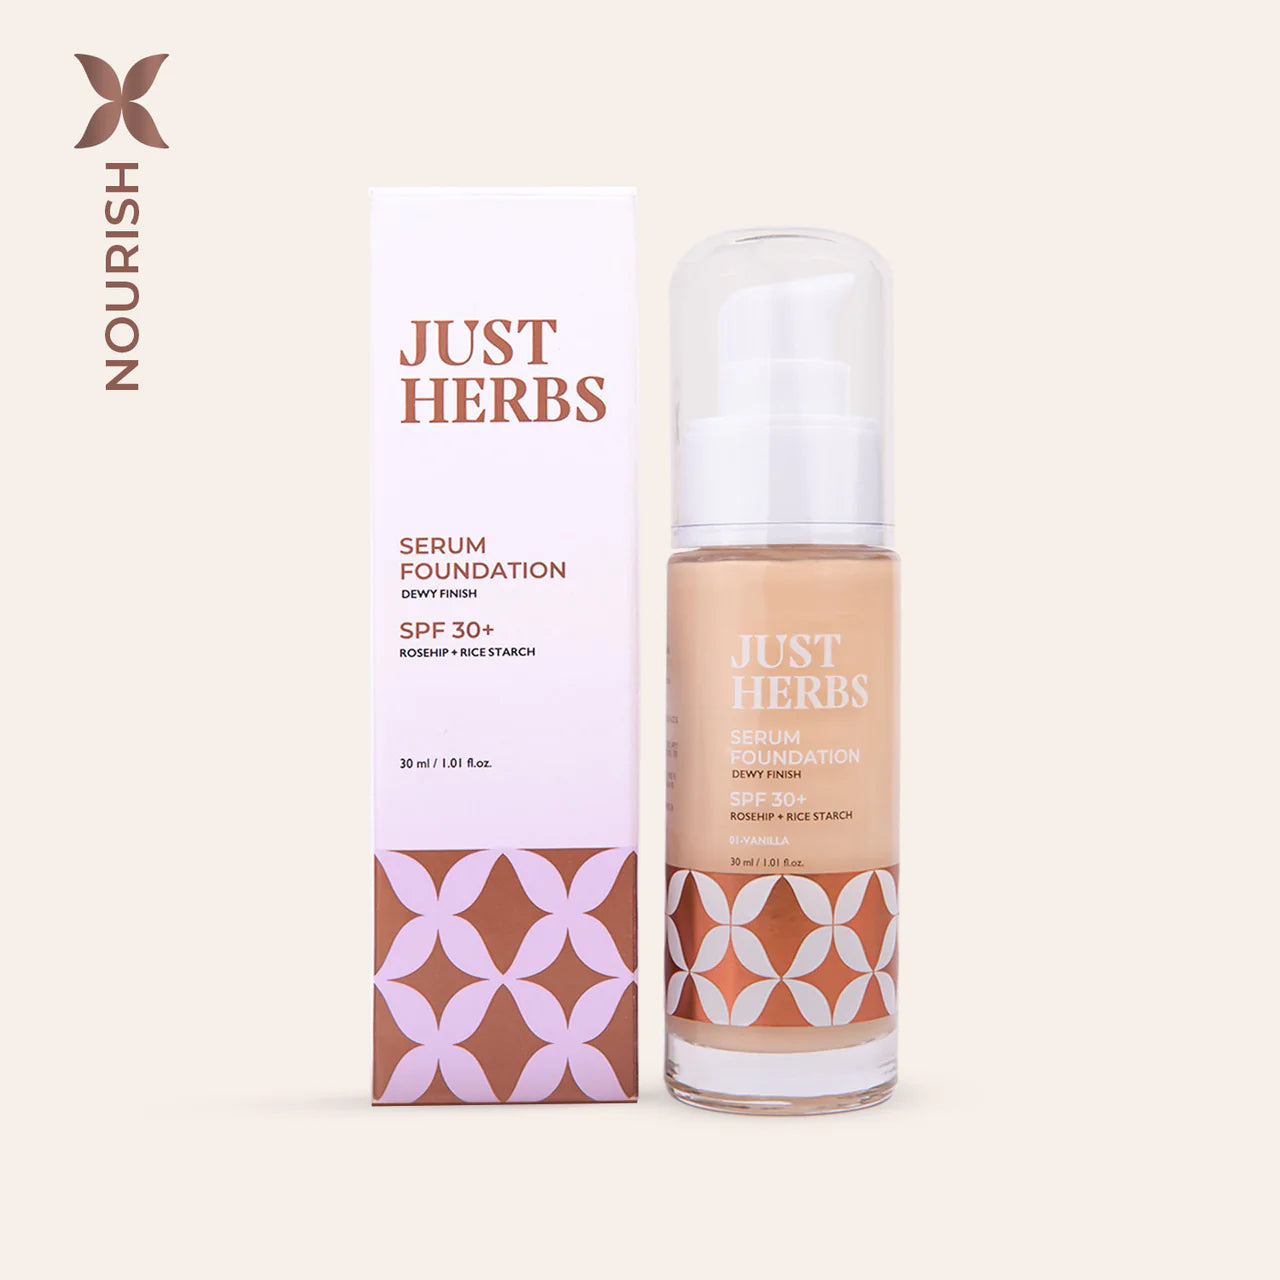 Just Herbs Serum Foundation Dewy Finish SPF 30+ with Rosehip and Rice Starch